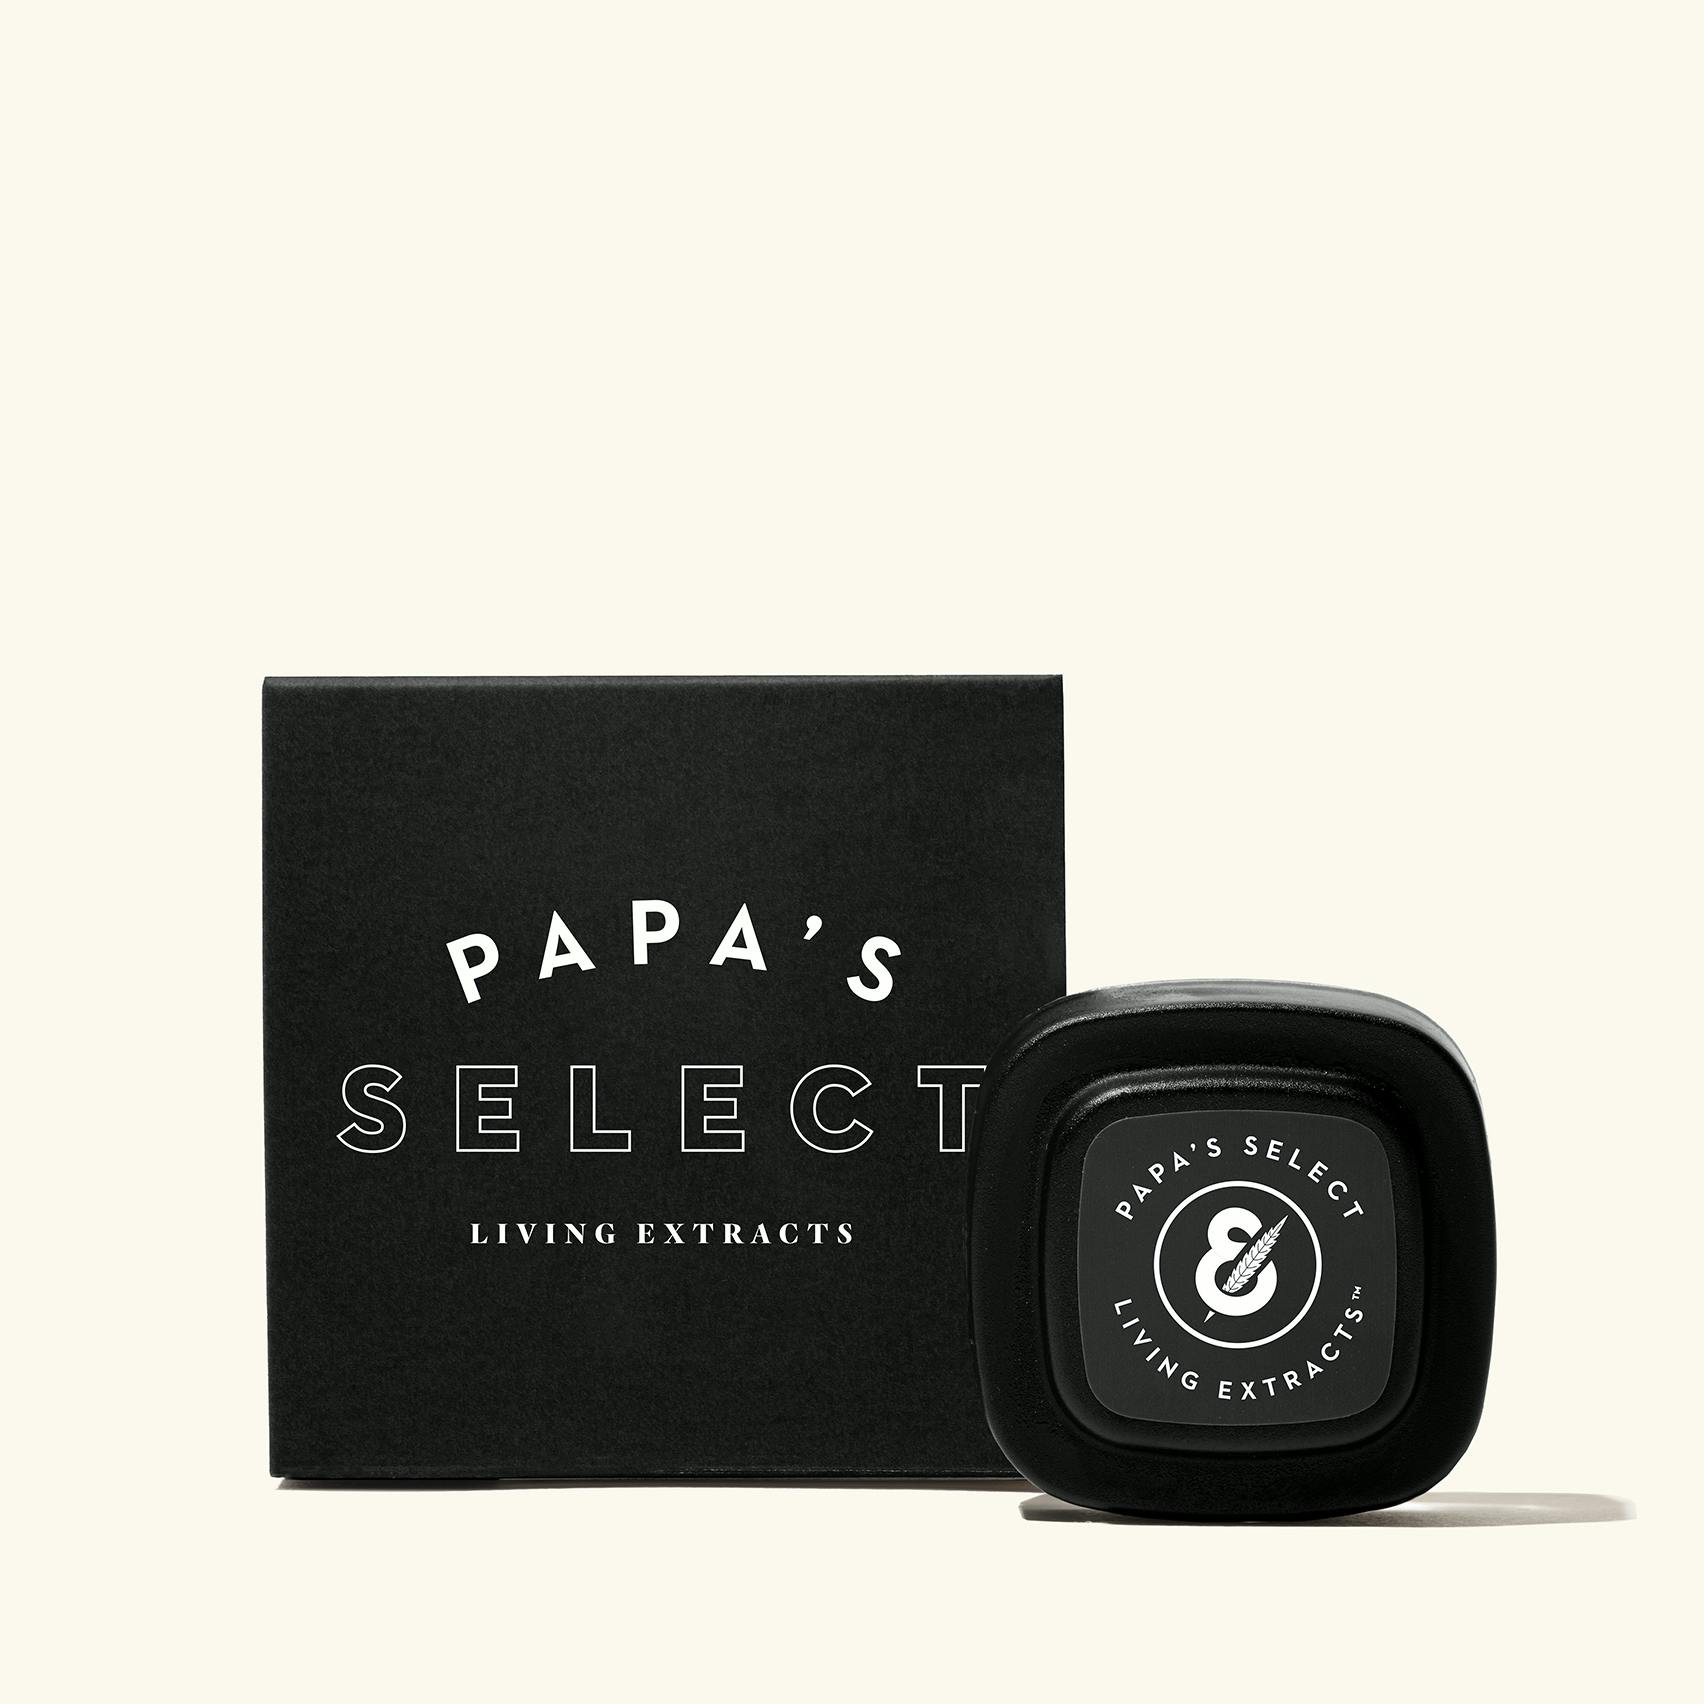 Papas Select Premium Concentrate Box Product Image PDP Main Gallery Cream 02